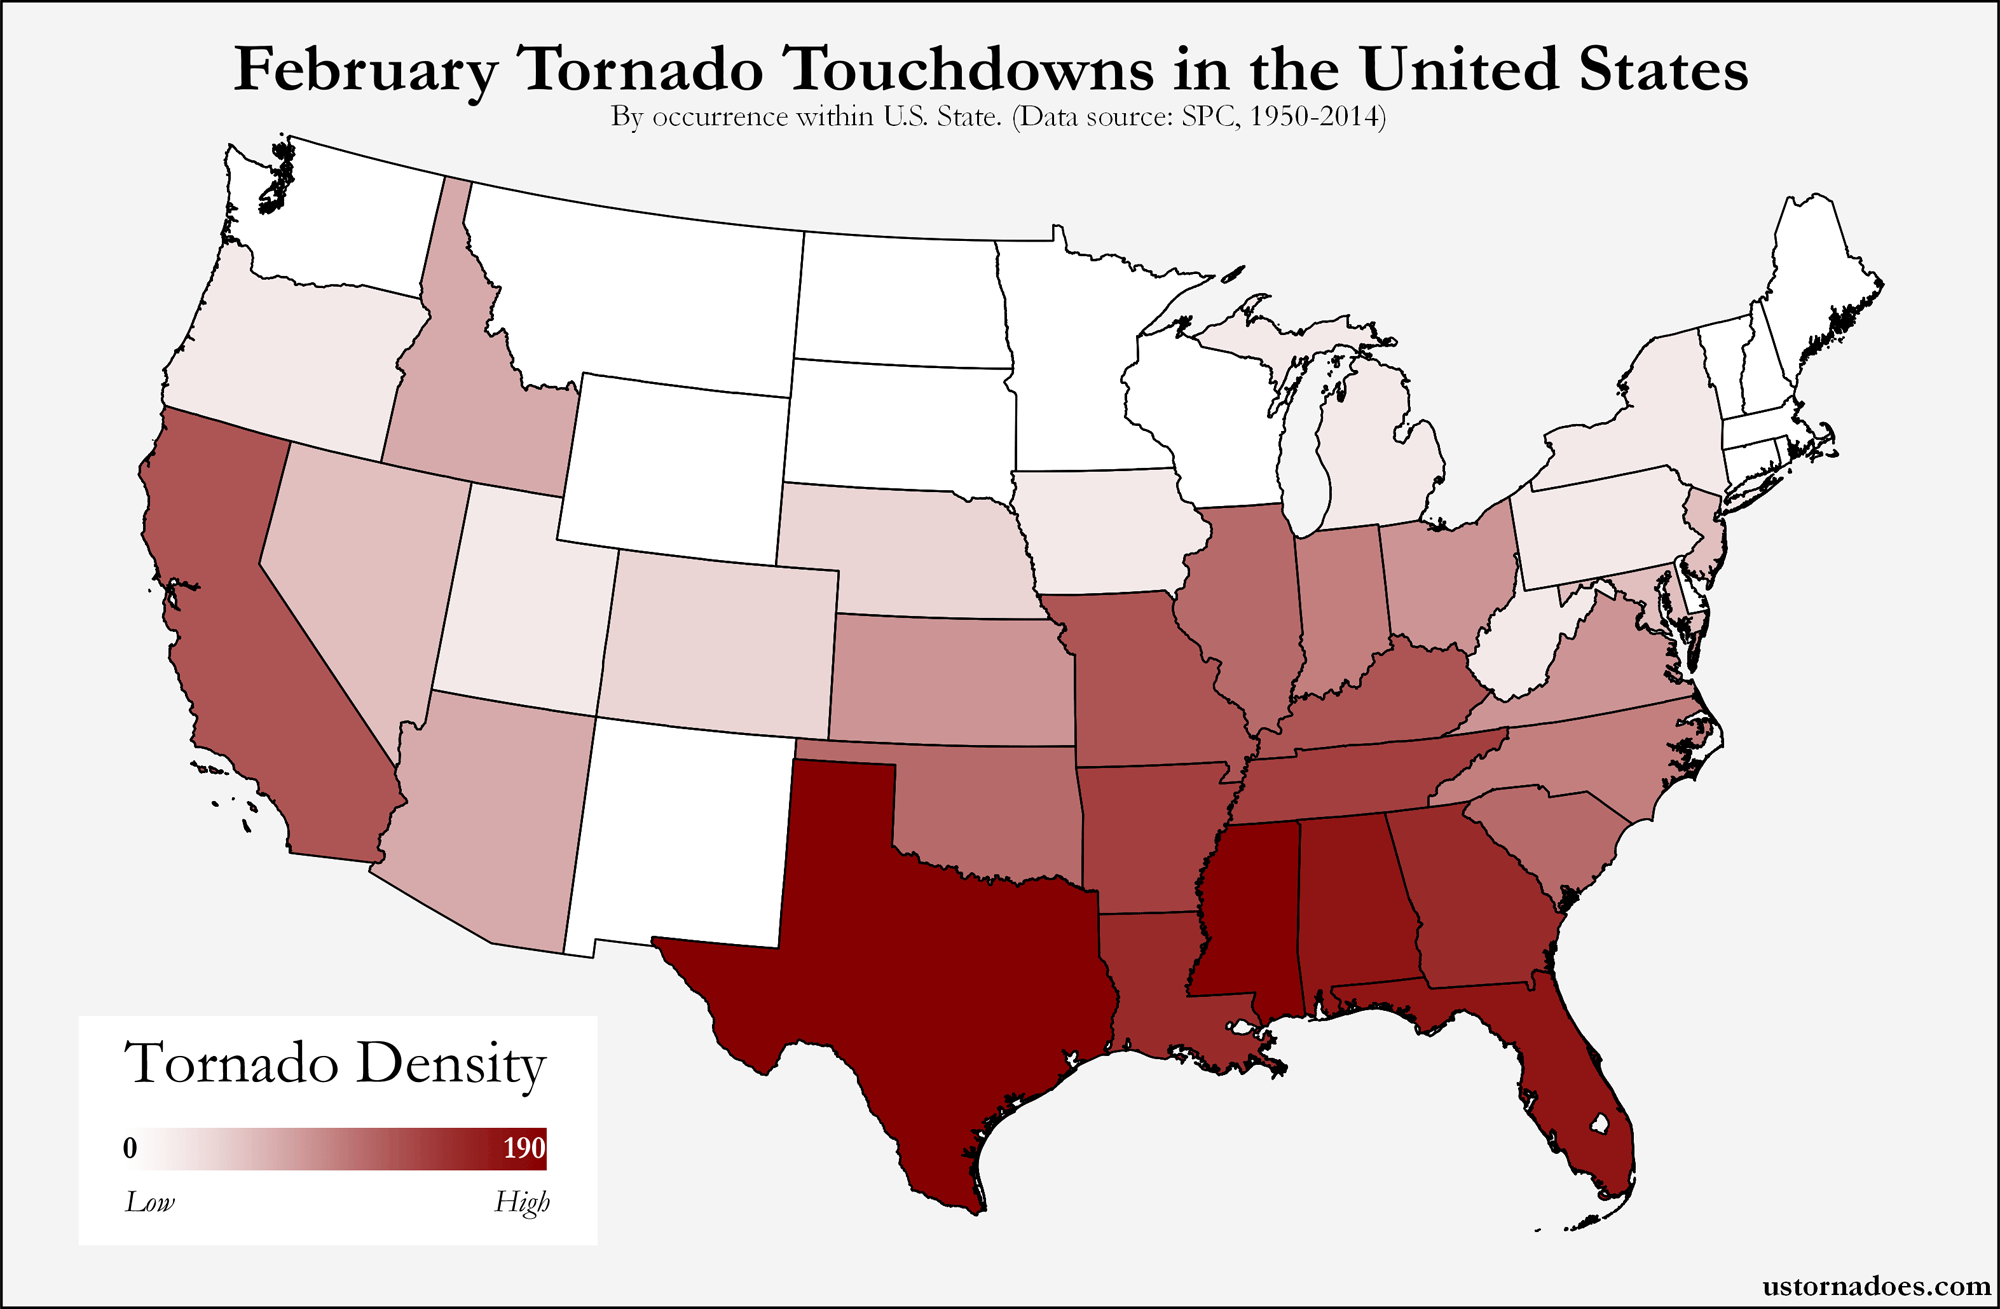 Here’s where tornadoes typically form in February across the United